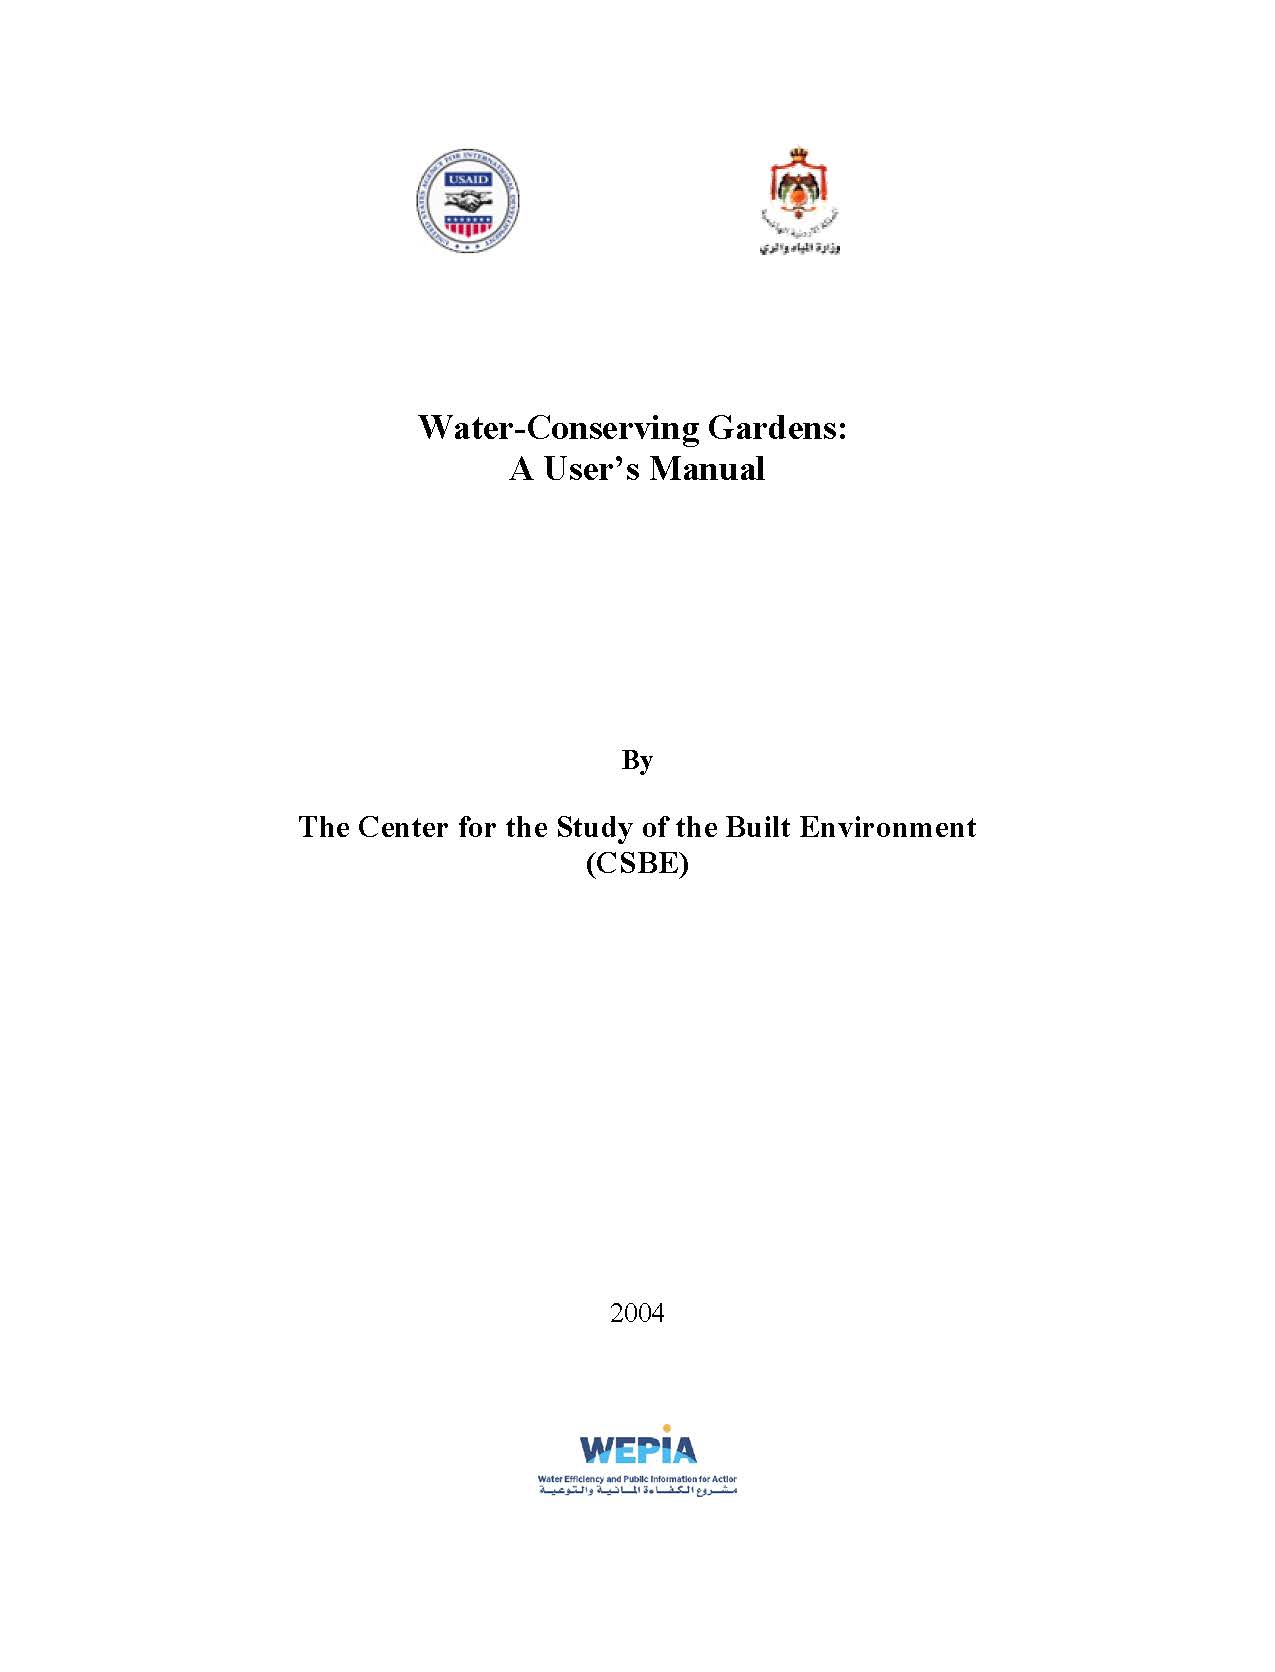 Water-Conserving Gardens: A User's Manual (English Version)